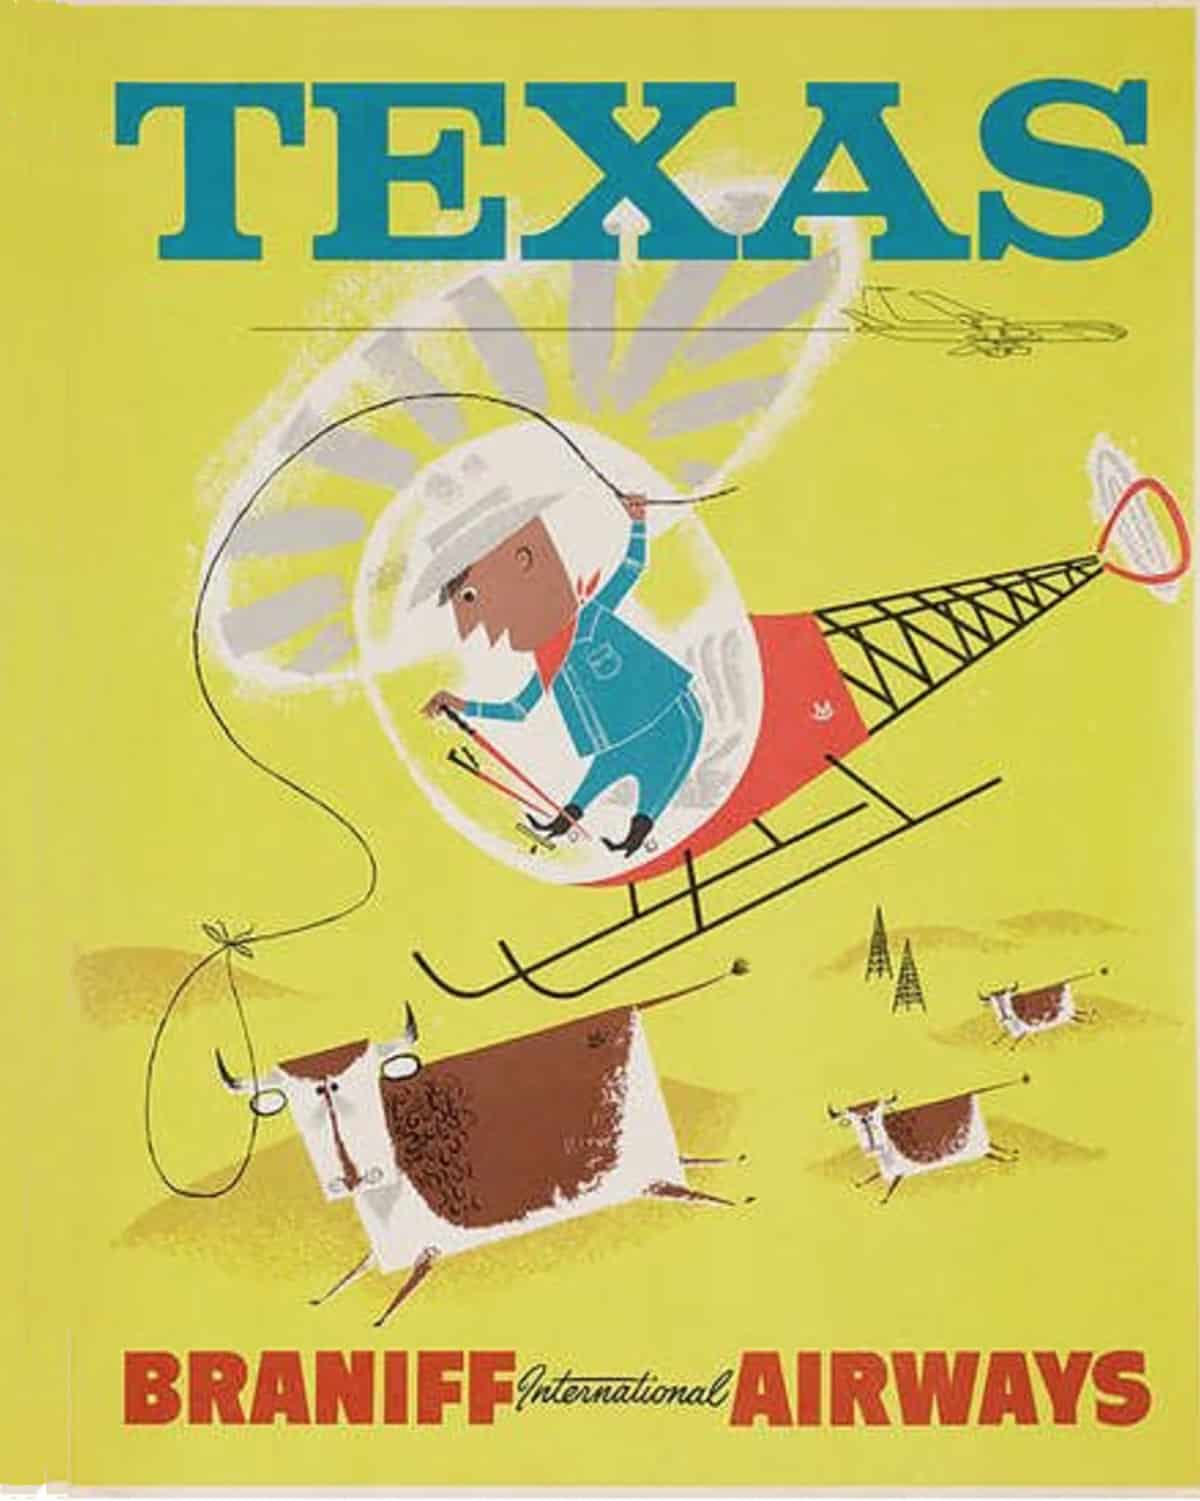 Braniff to Texas poster, 1960s